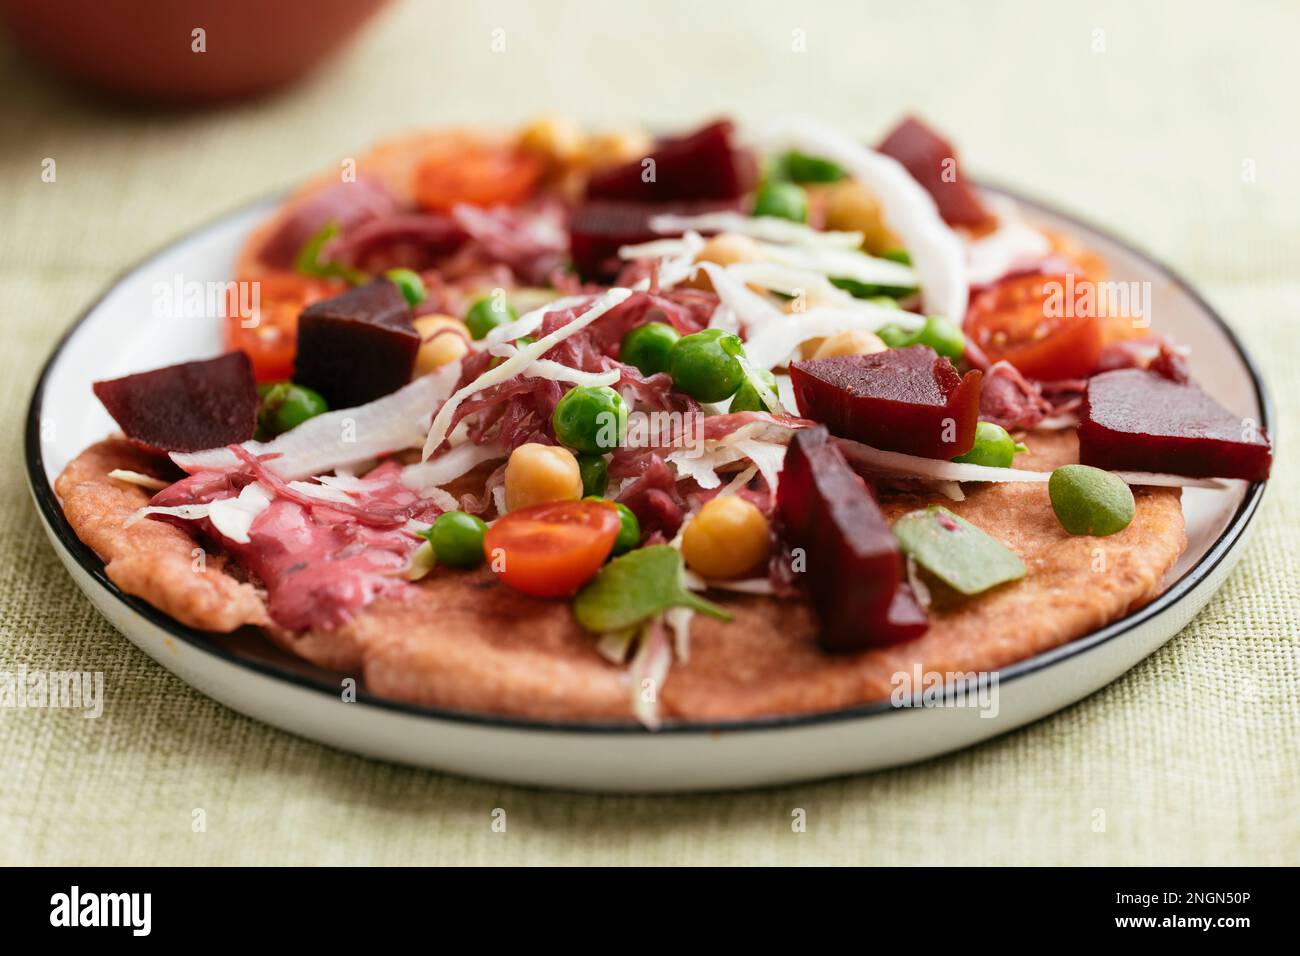 Homemade beet flatbreads with vegetables. Stock Photo